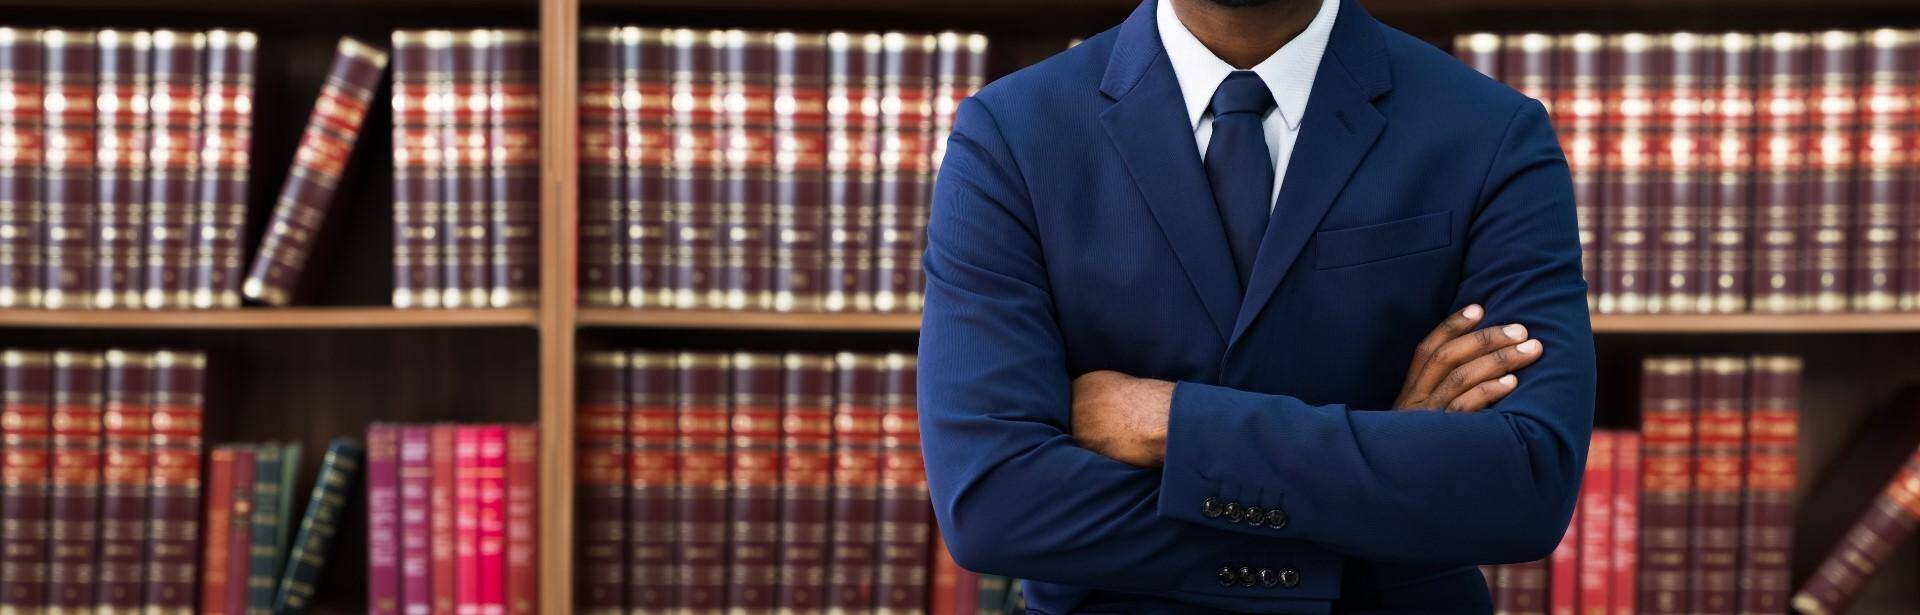 A black lawyer standing in front of a bookshelf of law book in Woodstock, Georgia